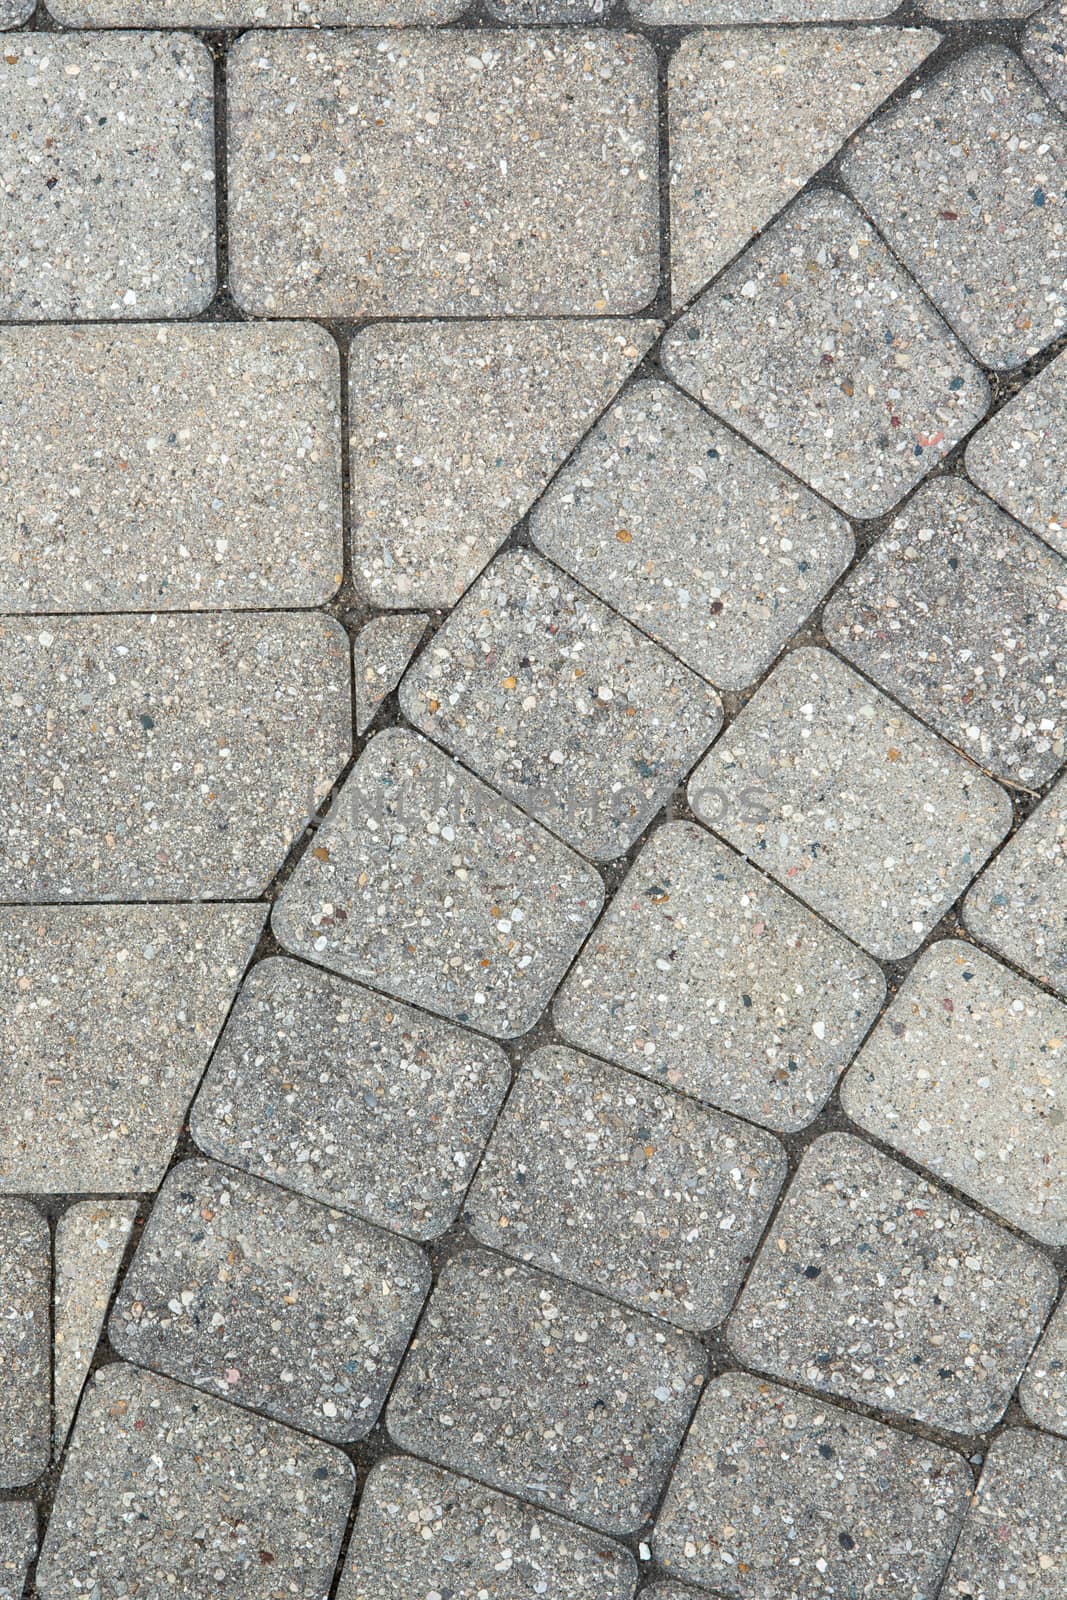 Grey brick paving background pattern and texture a portion of the edge of a circular design with the flooring